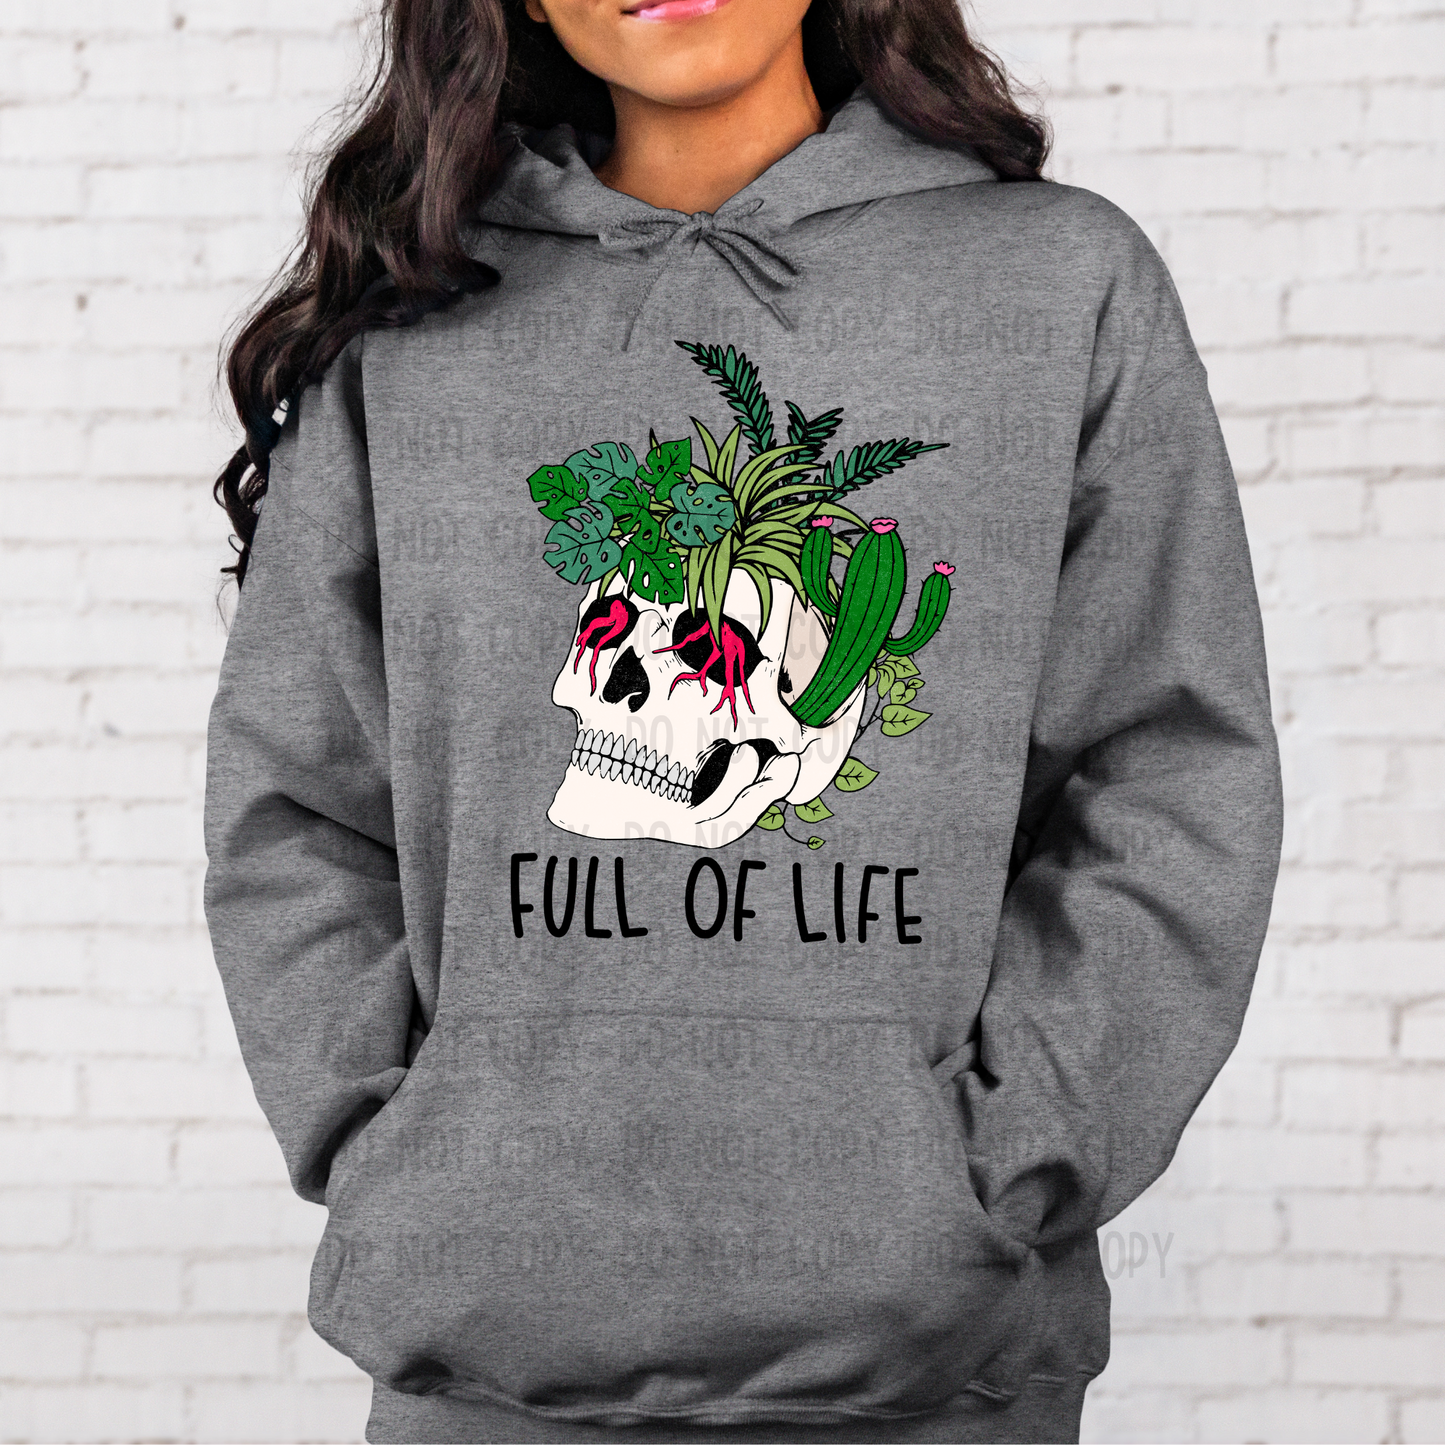 Full of life - Sublimation